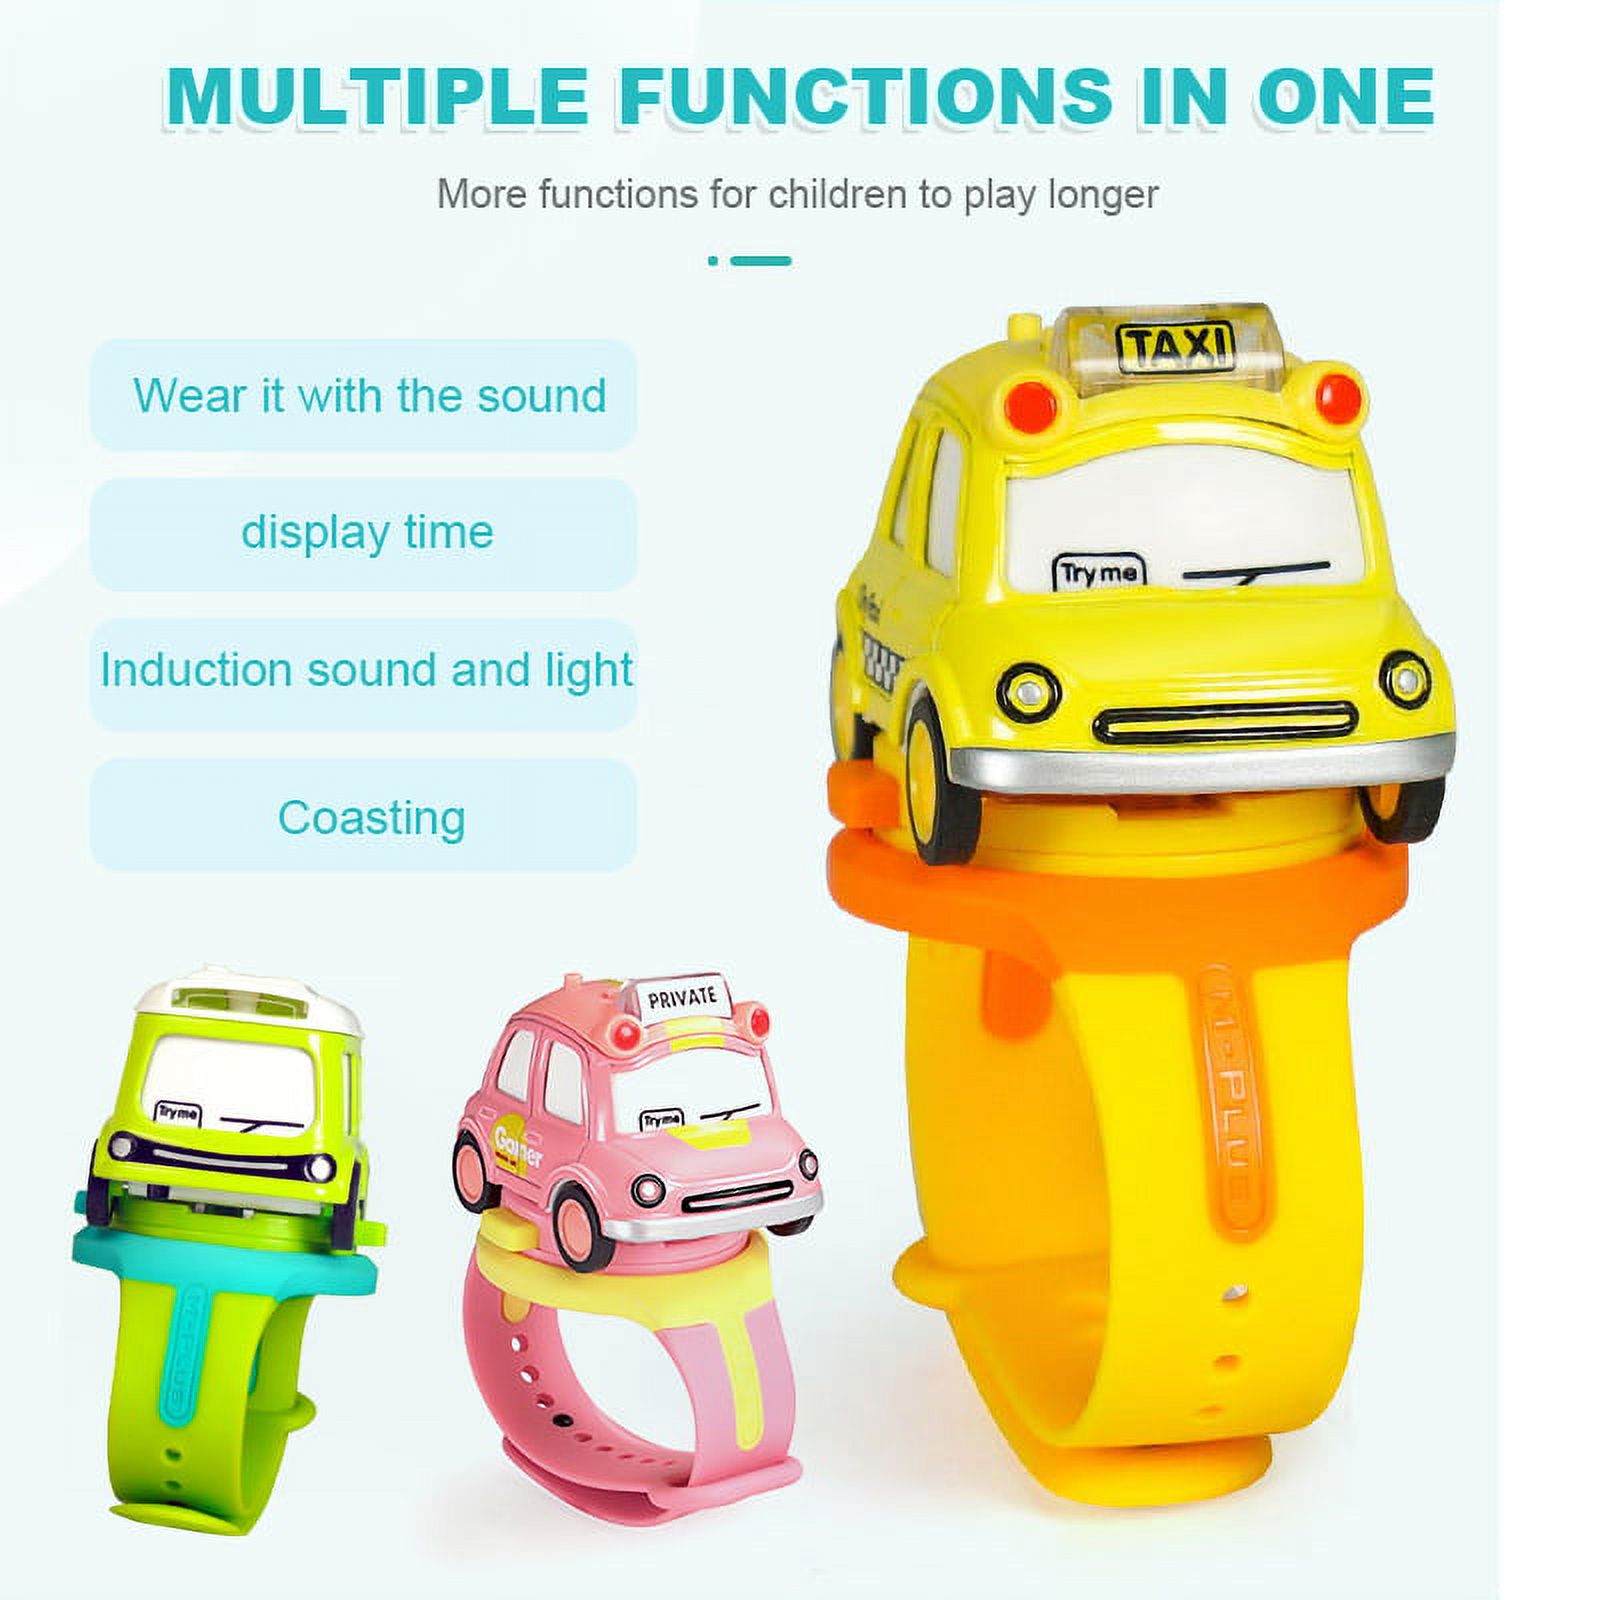 LNKOO 2 in 1 Pull Back car toy Wrist Watch Creative Children Watch Electronic Watch Kid Educational Toys Digital Watches Kids Boy Girl Clock For 3 4 5 6 7 Year Old Boys Girls - image 3 of 6